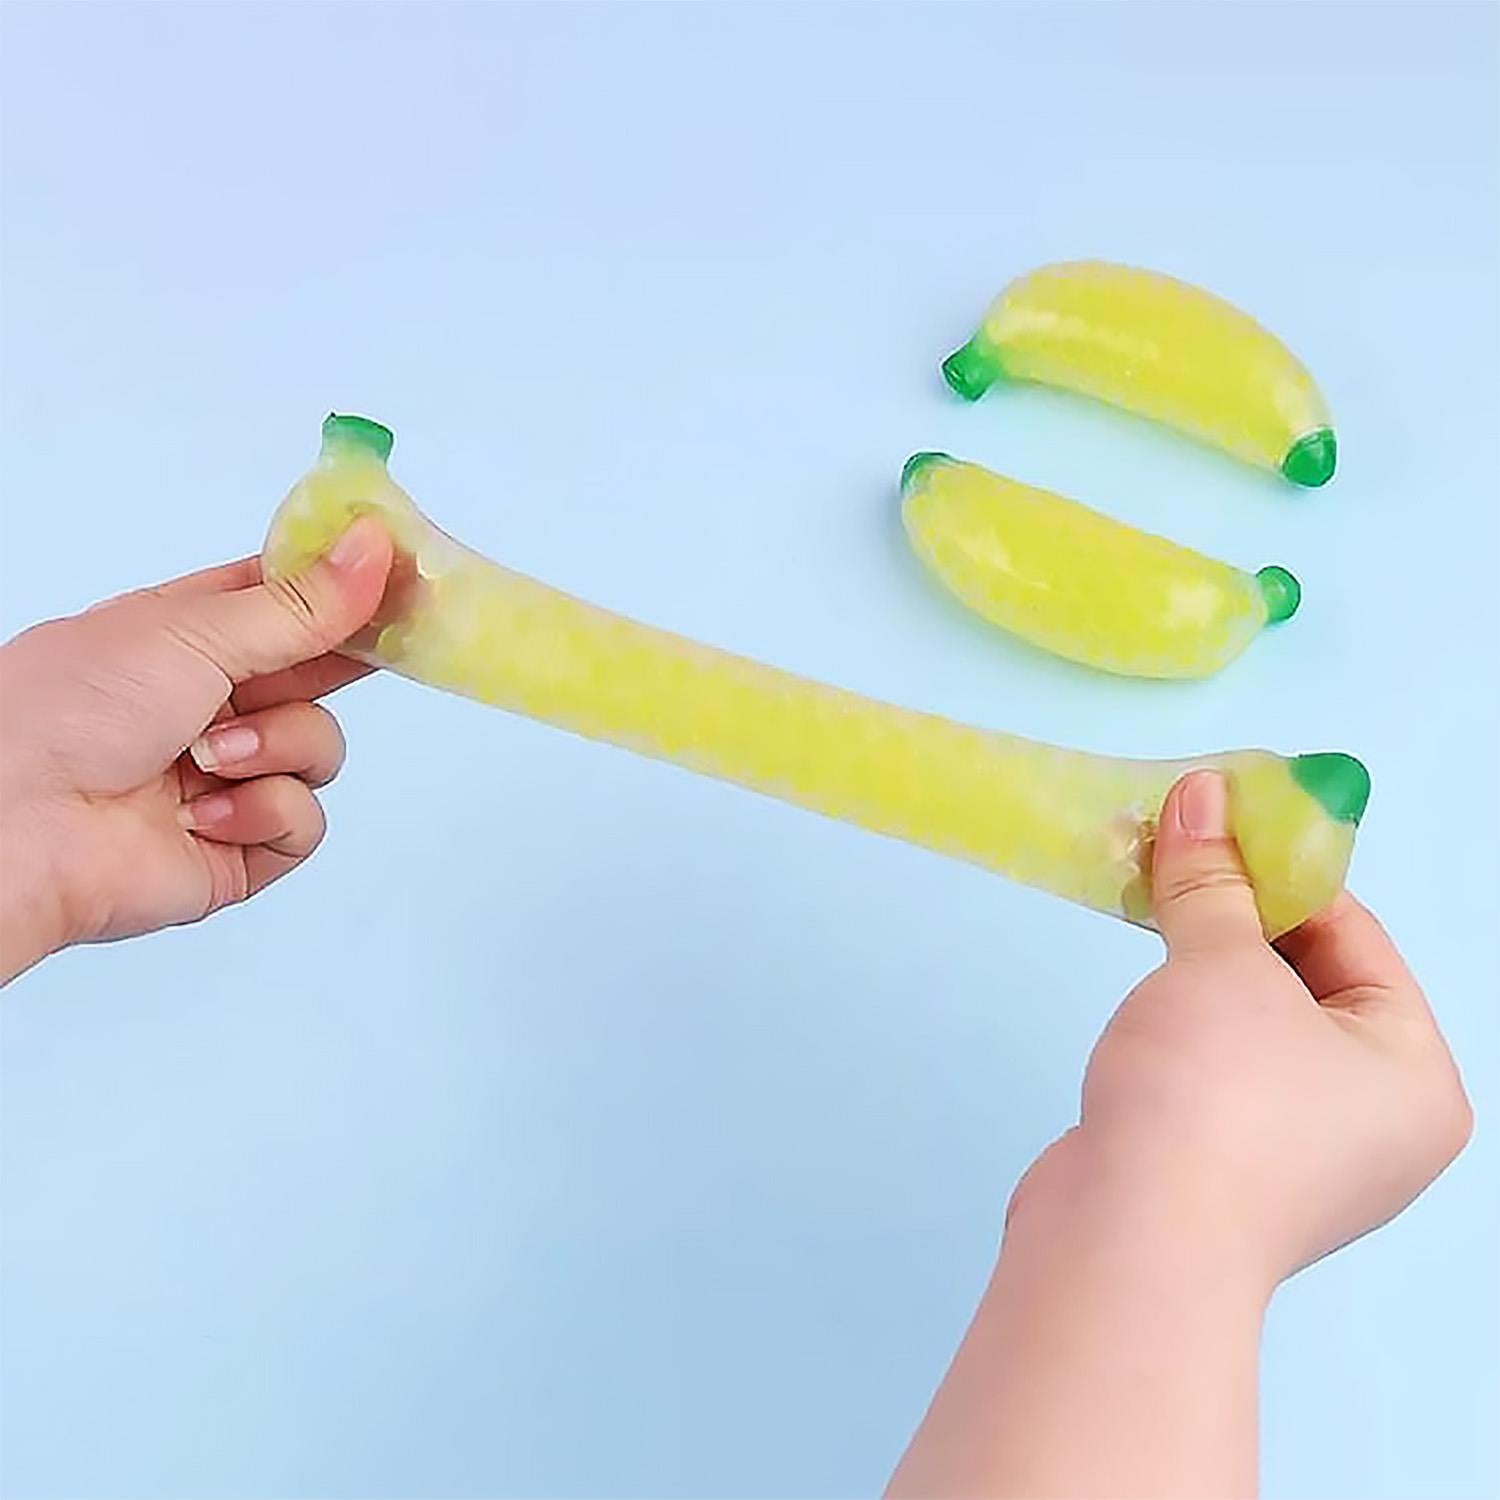 Bead Banana Pressure Release Sensory Toy by The Magic Toy Shop - The Magic Toy Shop